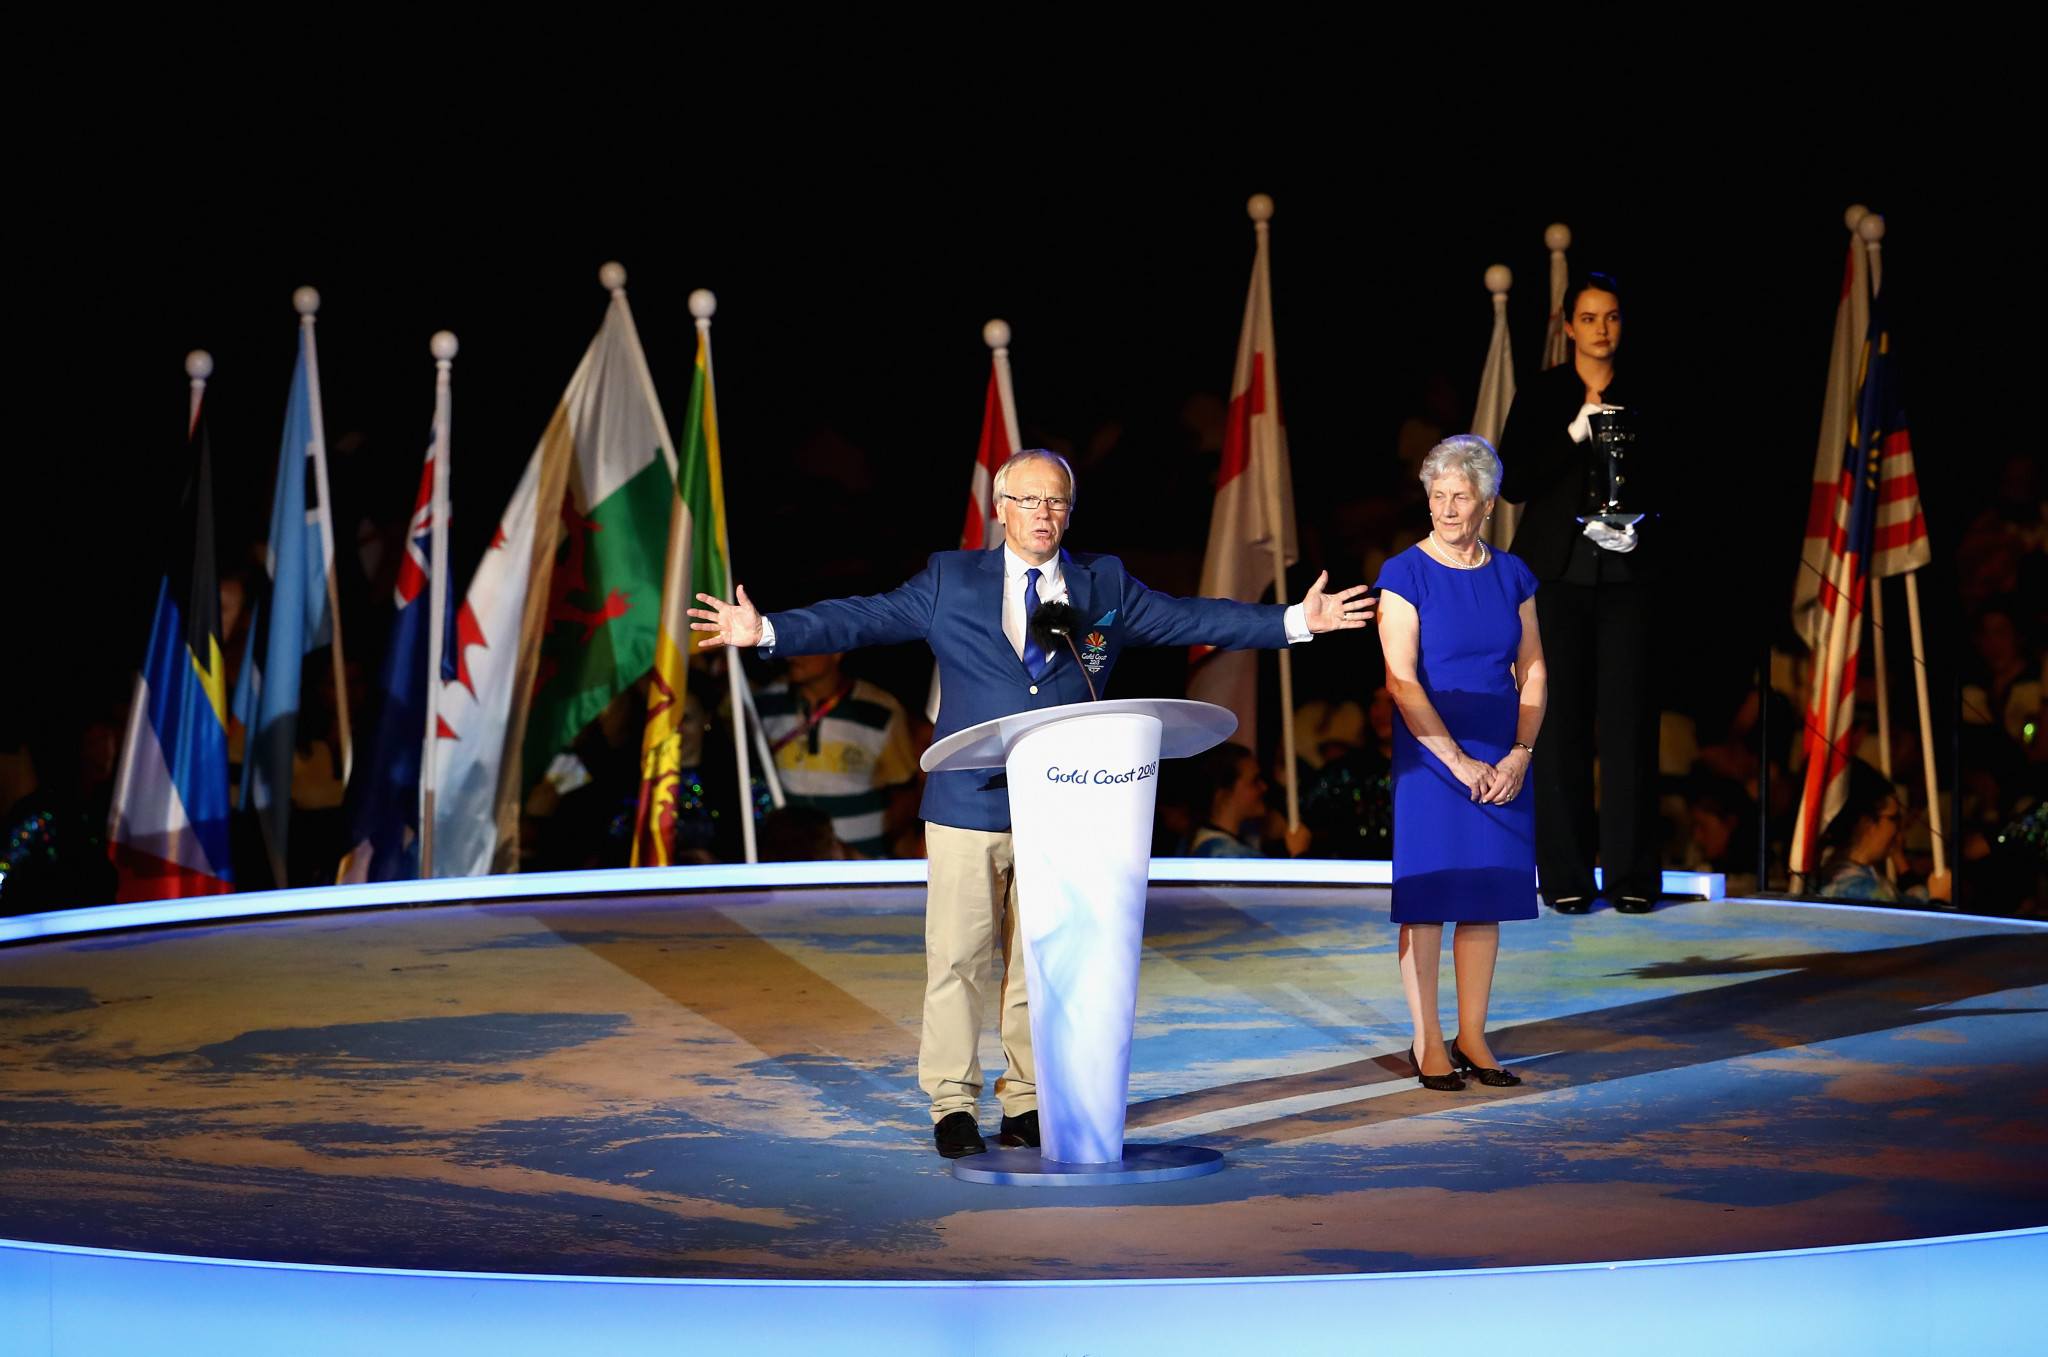 Peter Beattie makes a speech during the Closing Ceremony for the Gold Coast 2018 Commonwealth Games at Carrara Stadium ©Getty Images